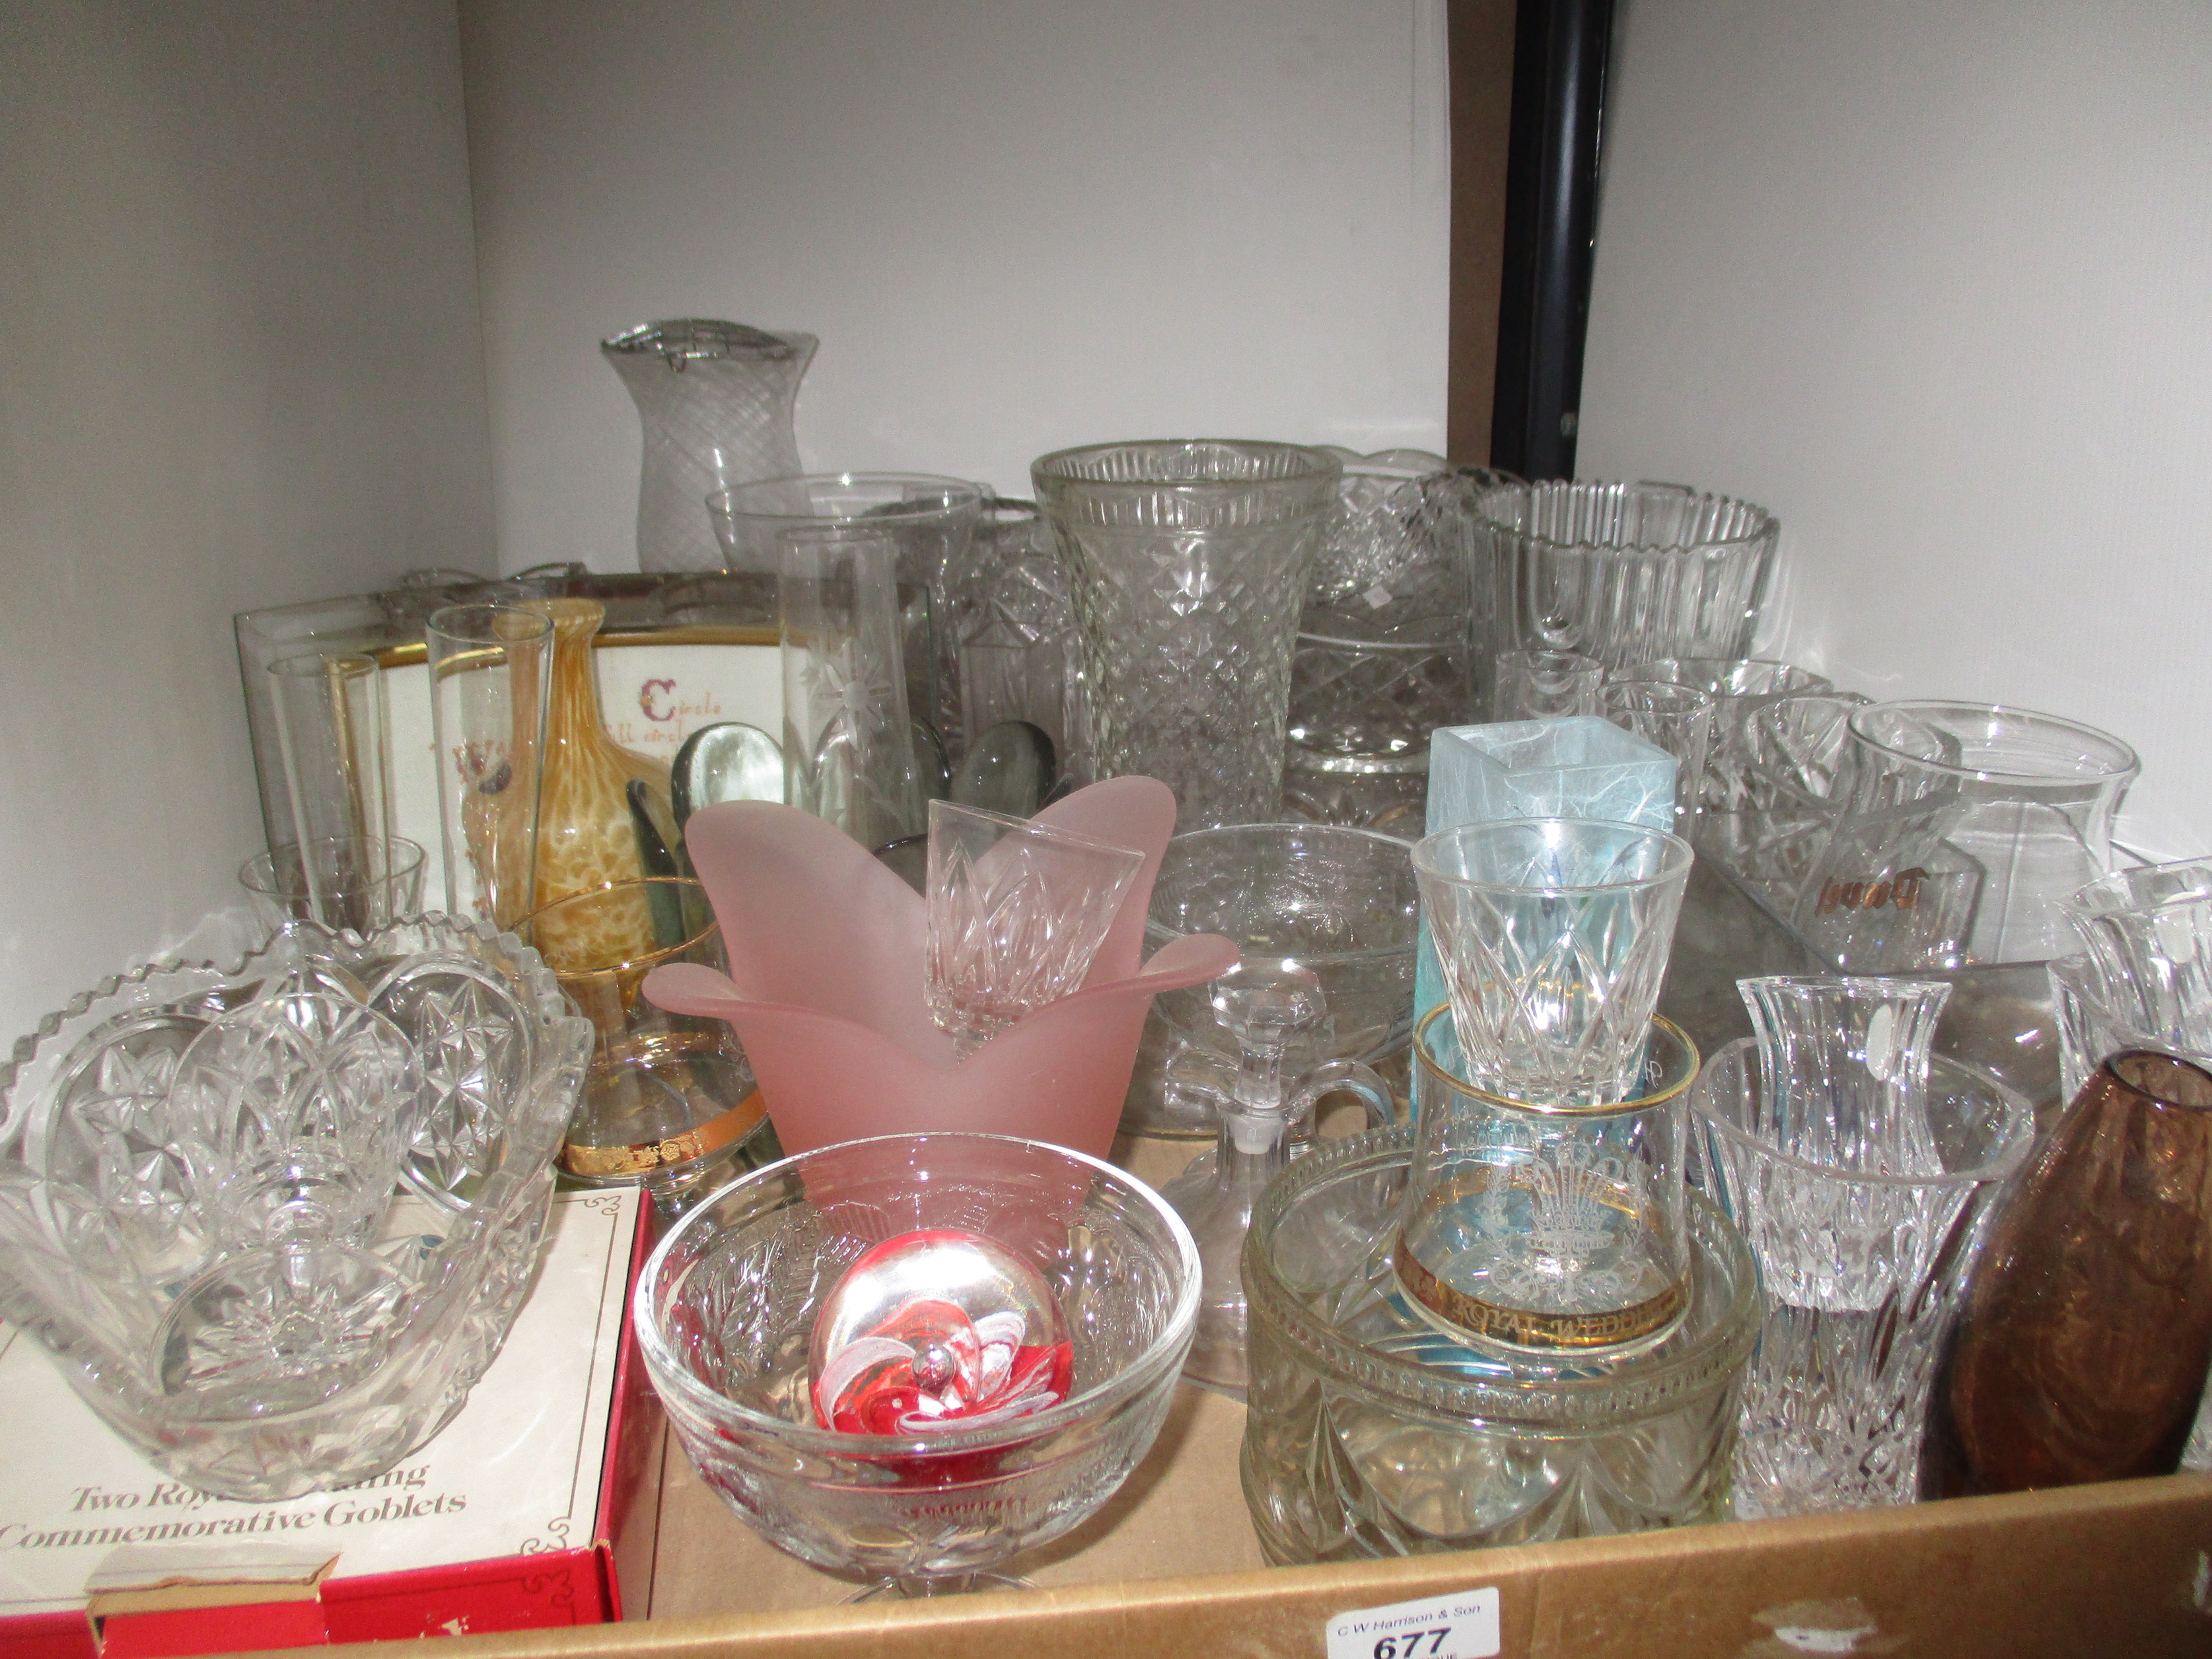 Contents to tray - large quantity of assorted glassware including bowls, vases, assorted glasses,